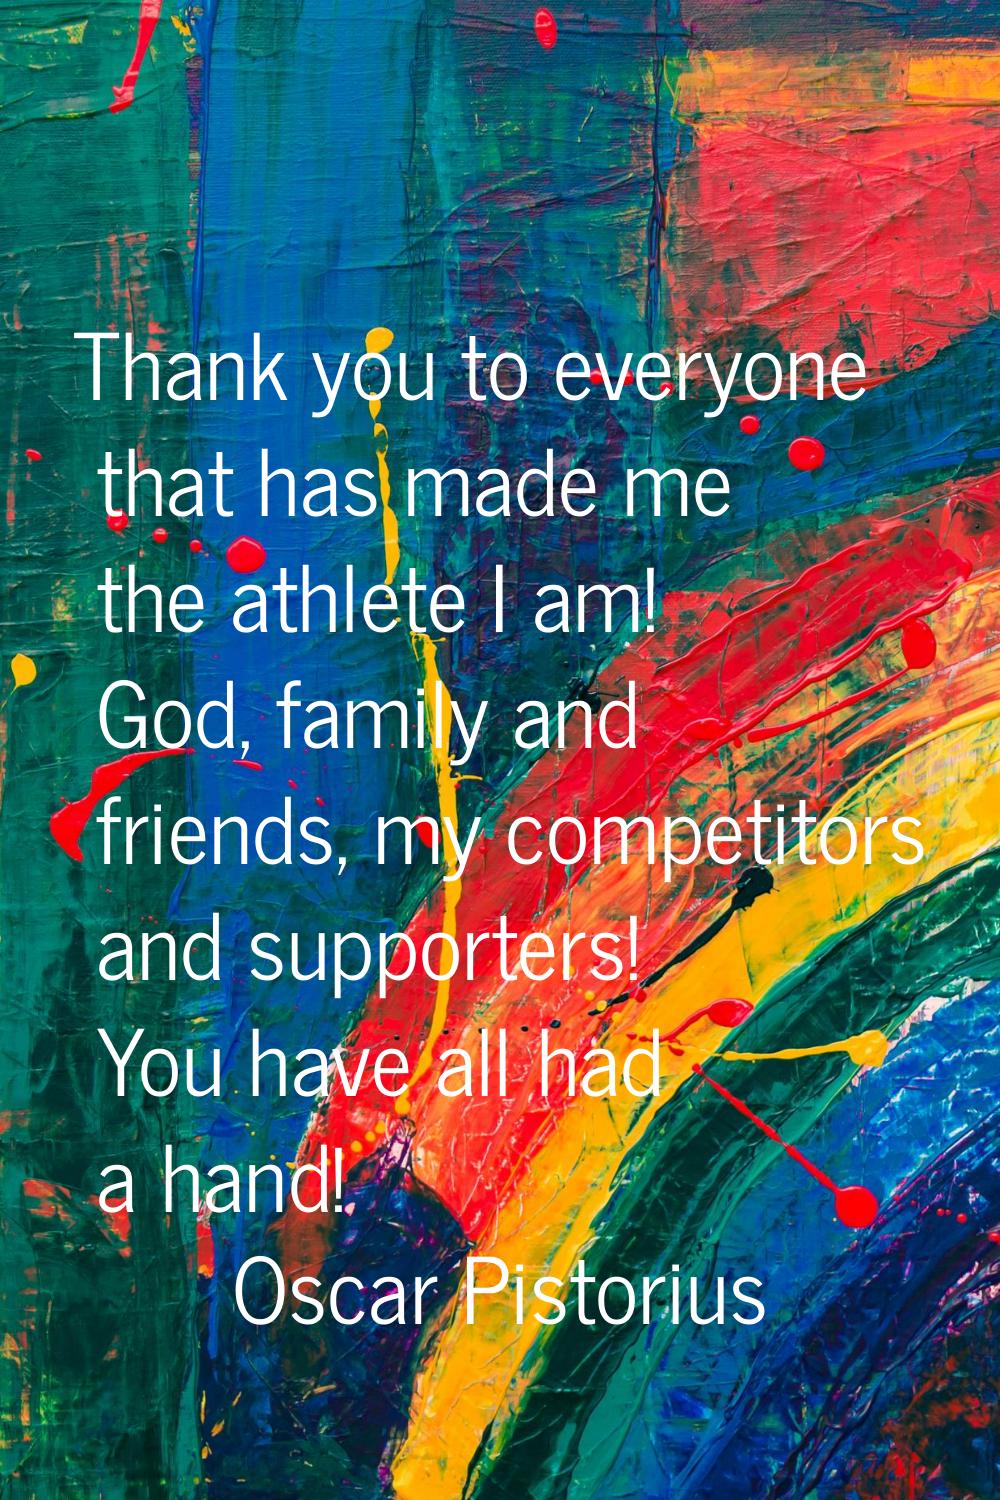 Thank you to everyone that has made me the athlete I am! God, family and friends, my competitors an